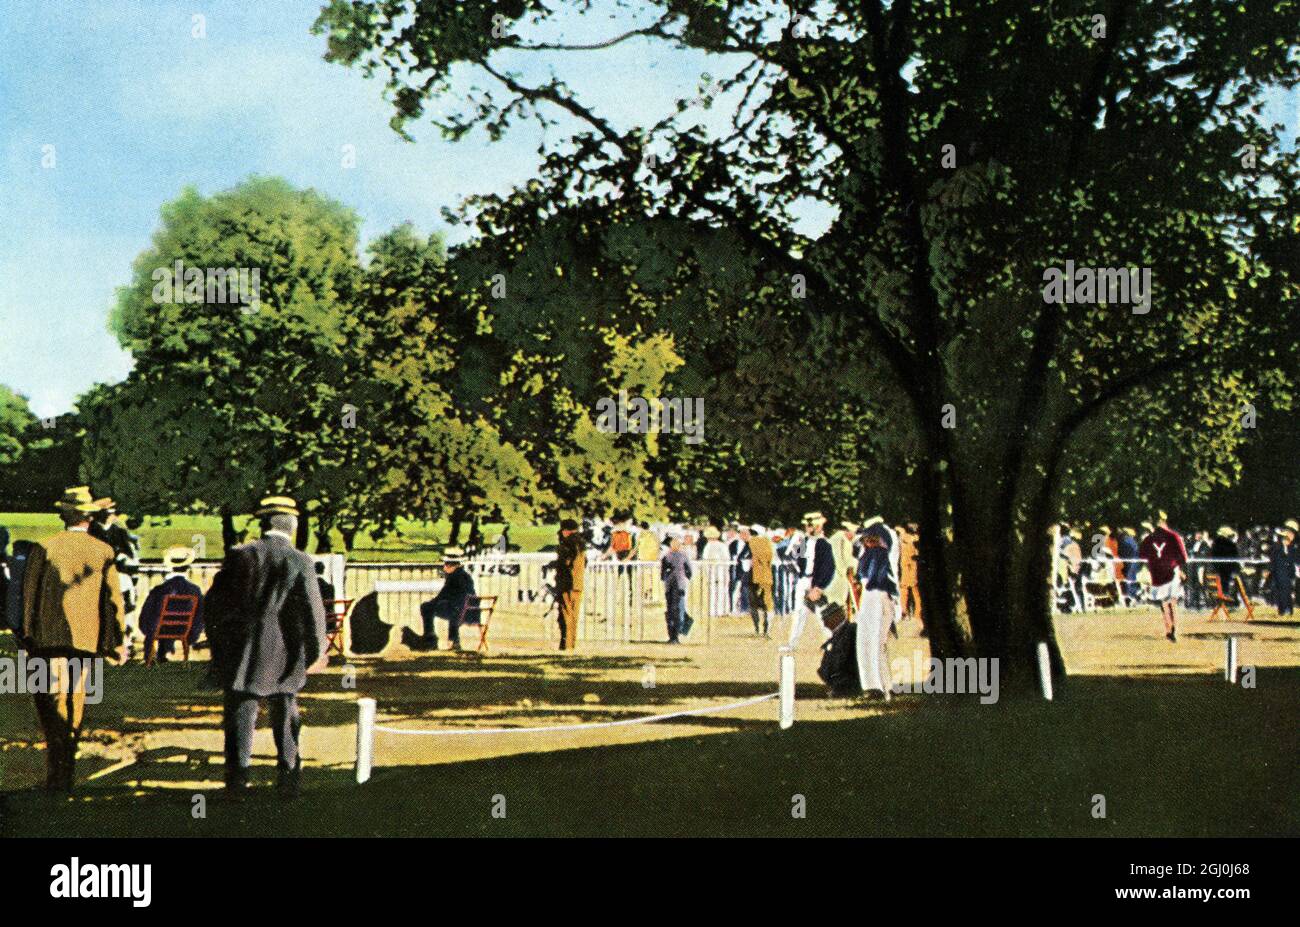 Paris 1900 - Fight taking place on the Association sports field Racing Club of France in Waldchen. 500m course covered with grass and the tree in the foreground blocking the view. Spectators standing in the way. ©TopFoto Stock Photo